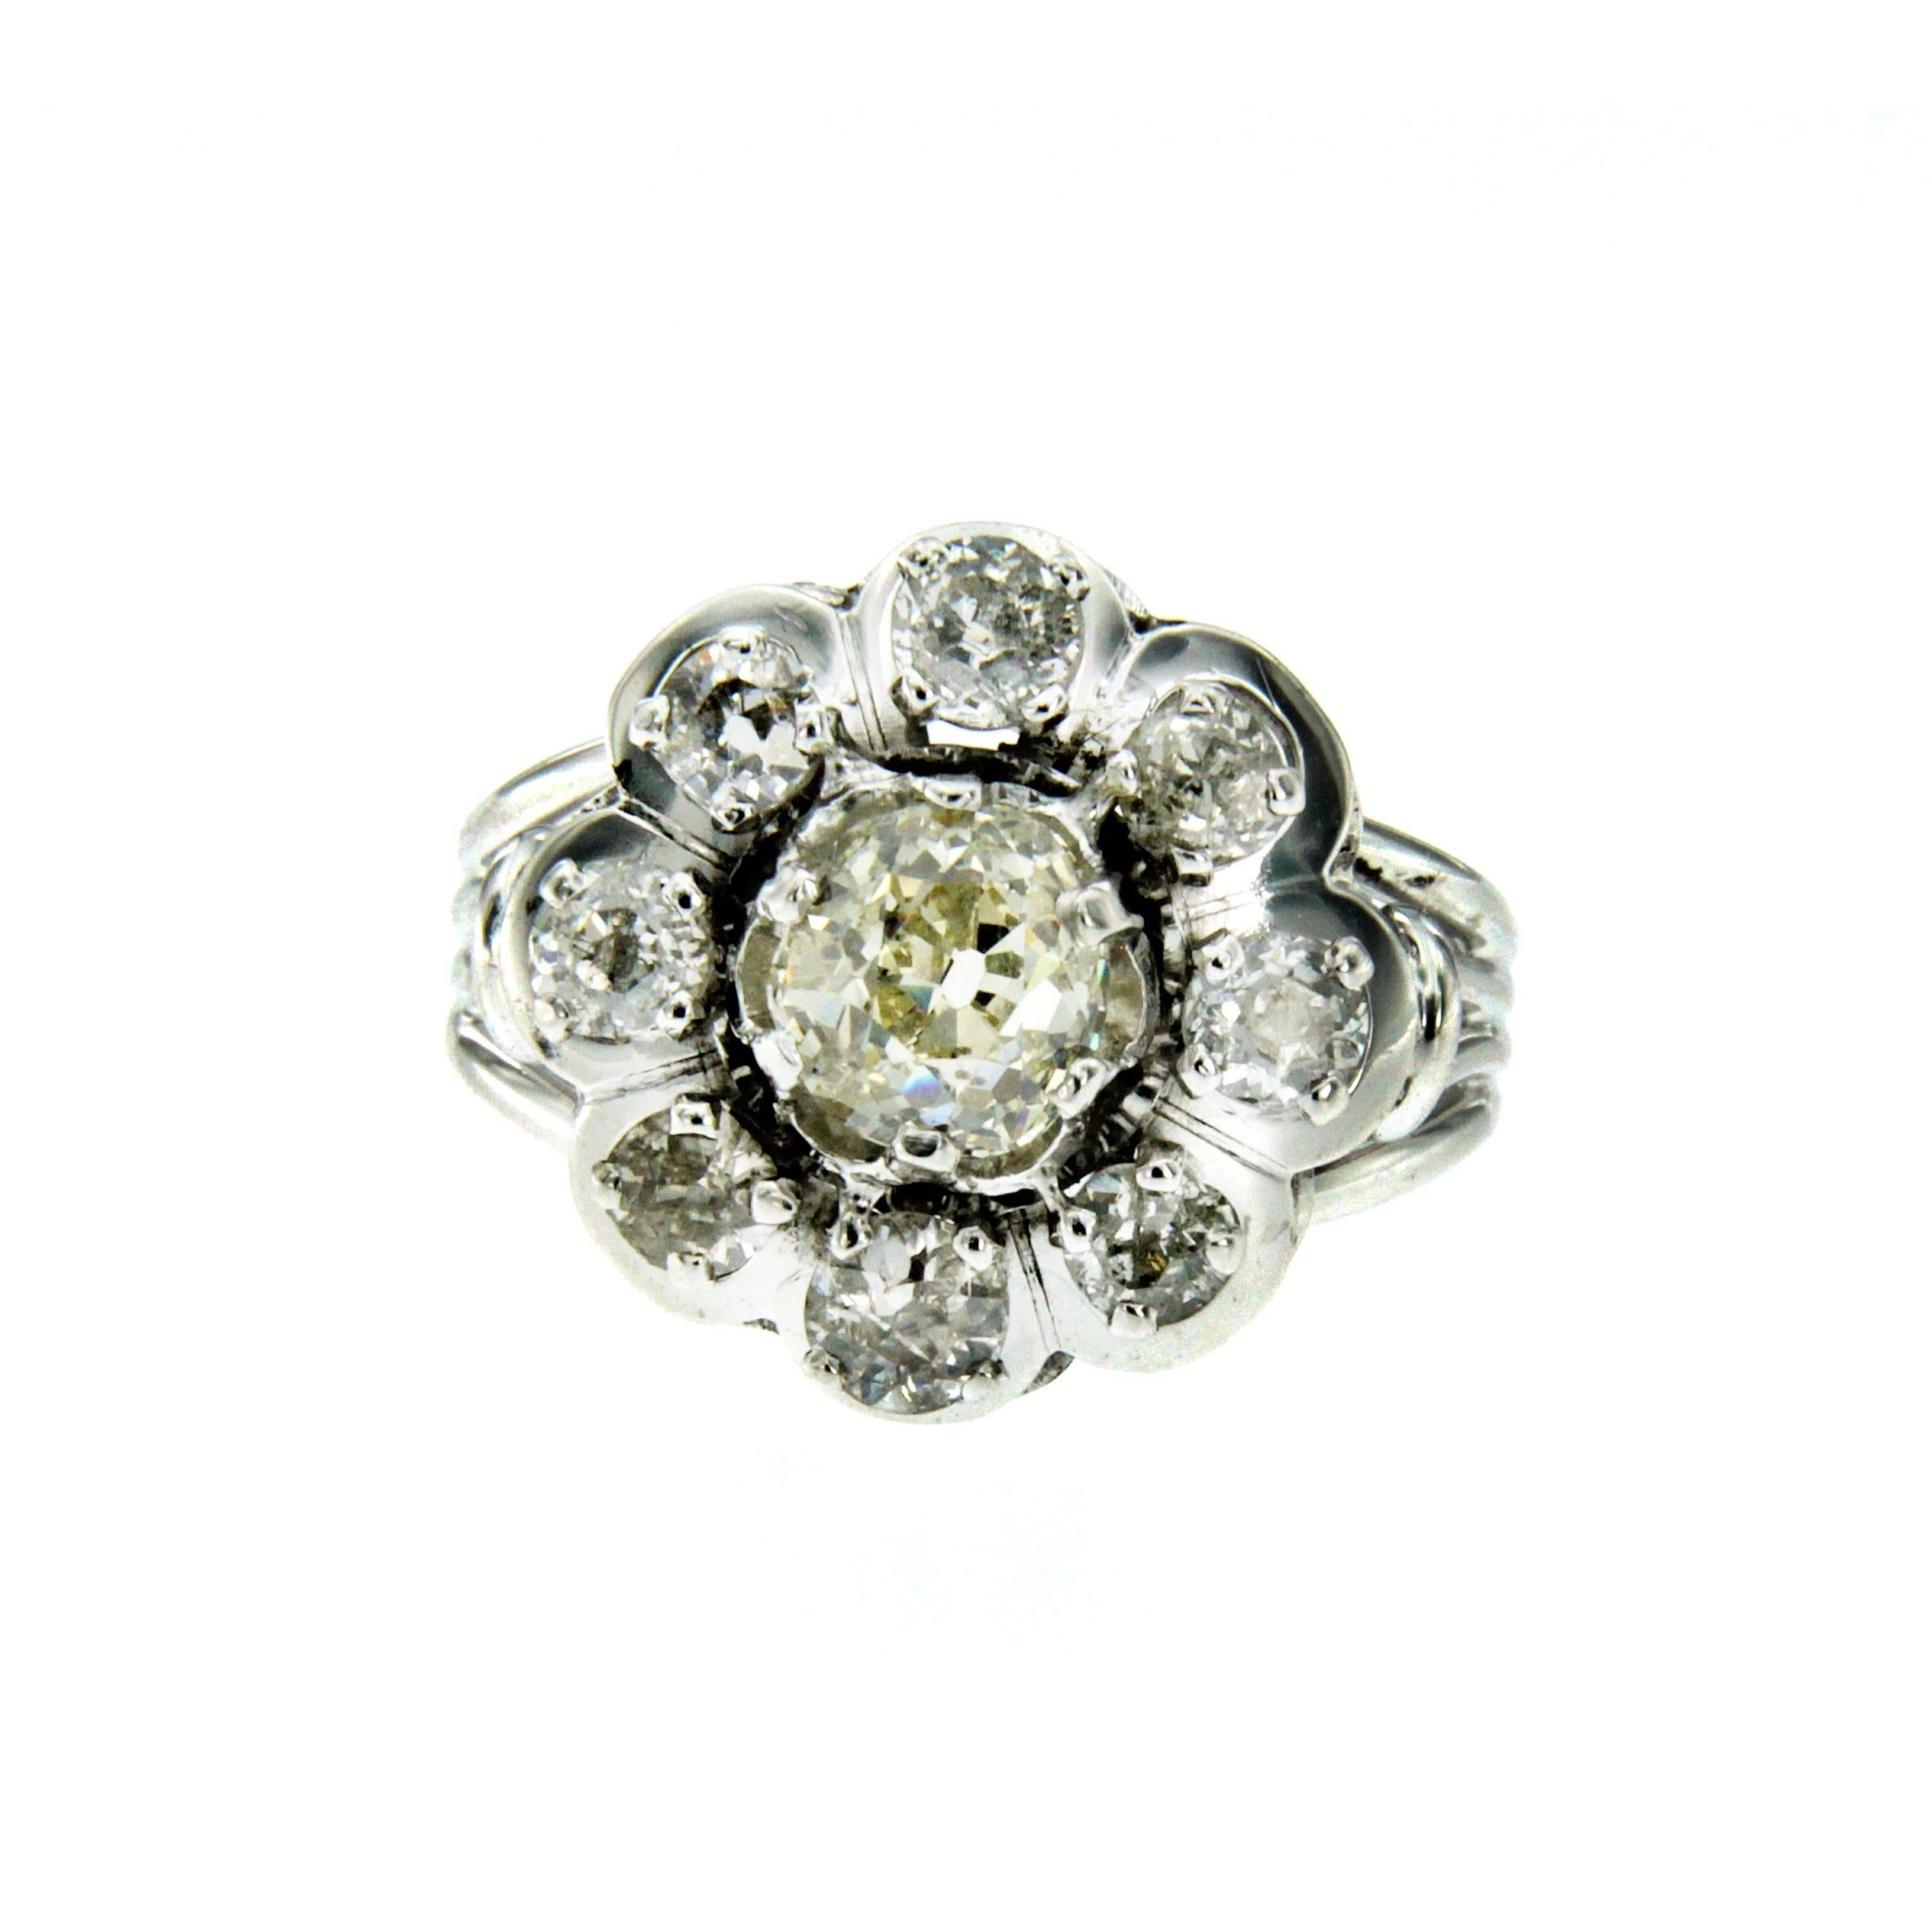 A 18k white Gold Art Deco ring featuring a flower design set in the center with a 1.30 ct old mine-cut diamond L color VS clarity, surrounded by 8 old mine-cut diamonds weighing 1.60ct. graded H/I color vs clarity. Circa 1930 

CONDITION: Pre-owned